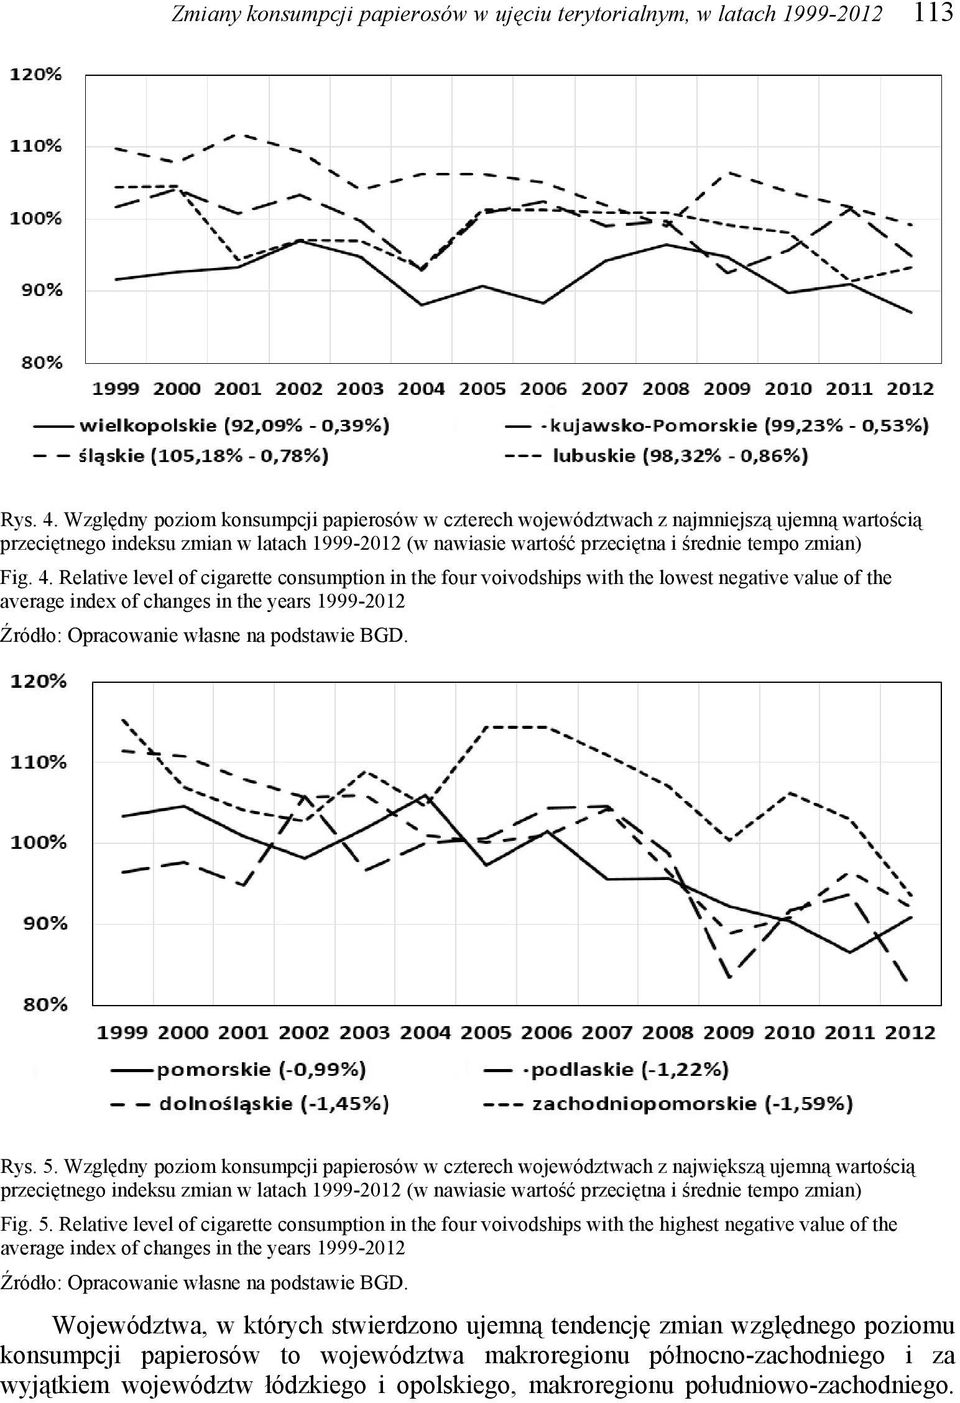 4. Relative level of cigarette consumption in the four voivodships with the lowest negative value of the average index of changes in the years 1999-2012 Źródło: Opracowanie własne na podstawie BGD.